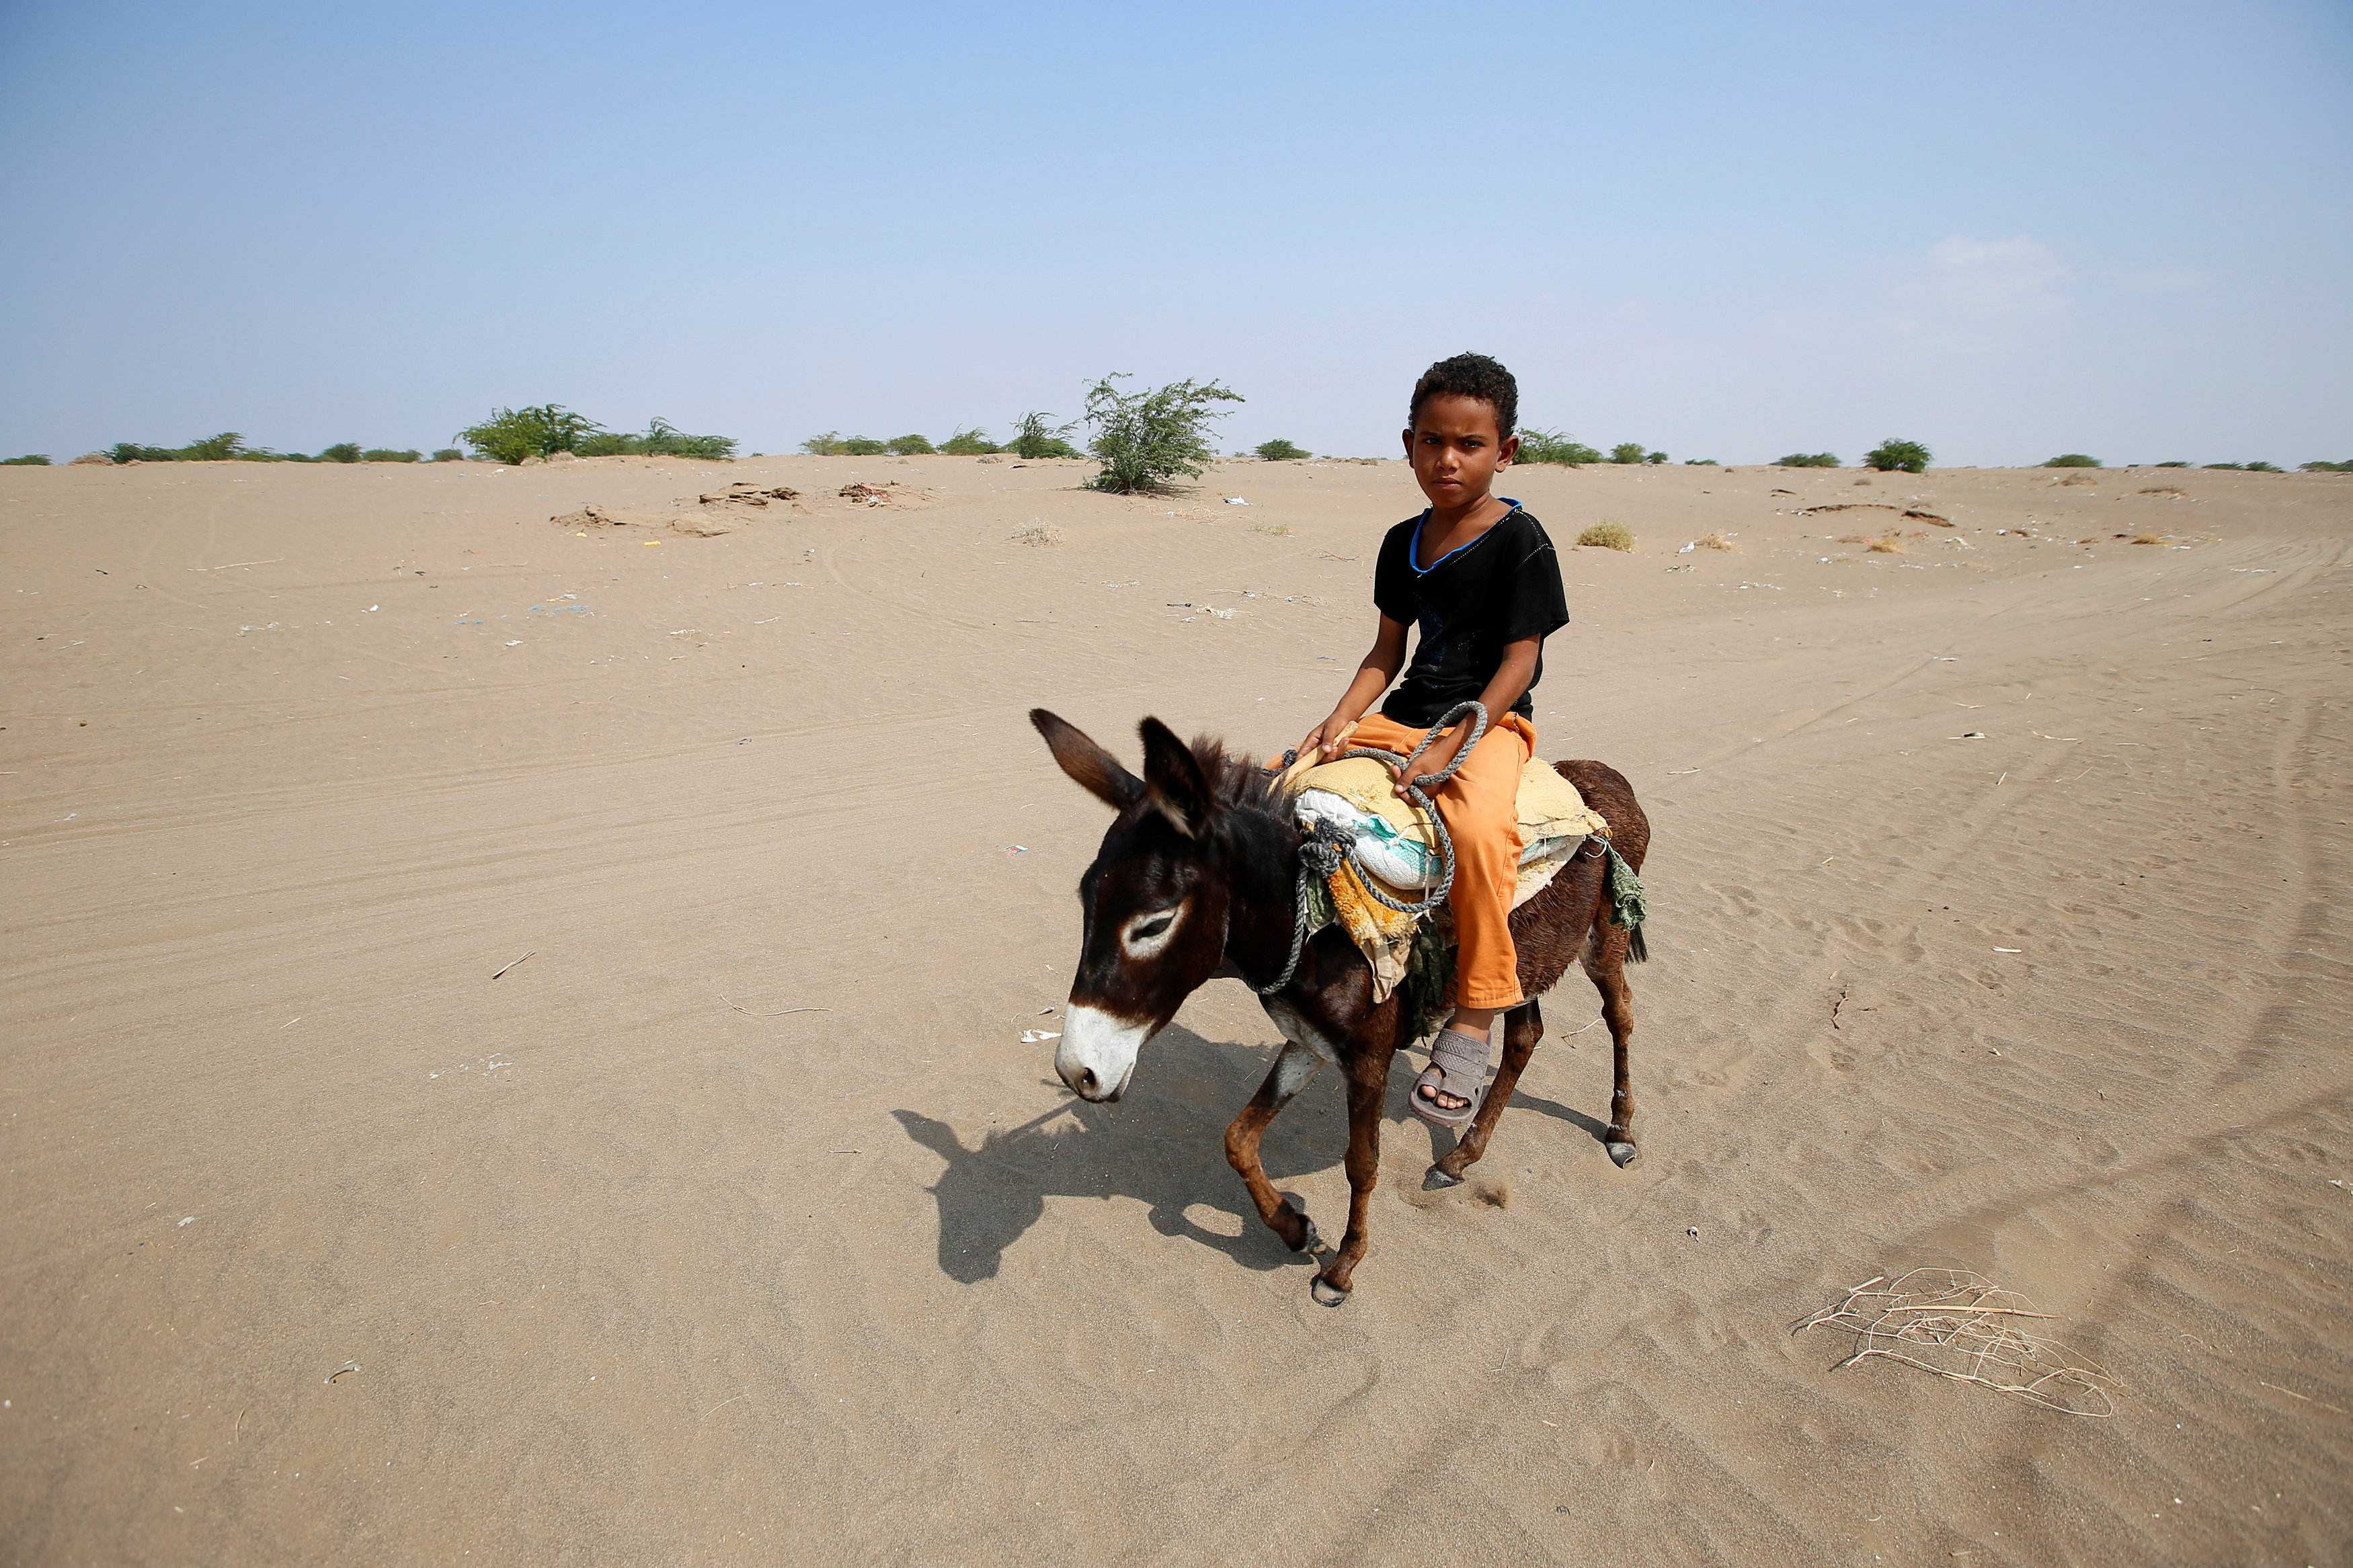 A boy rides a donkey on the outskirts of the Red Sea port city of Hodeida